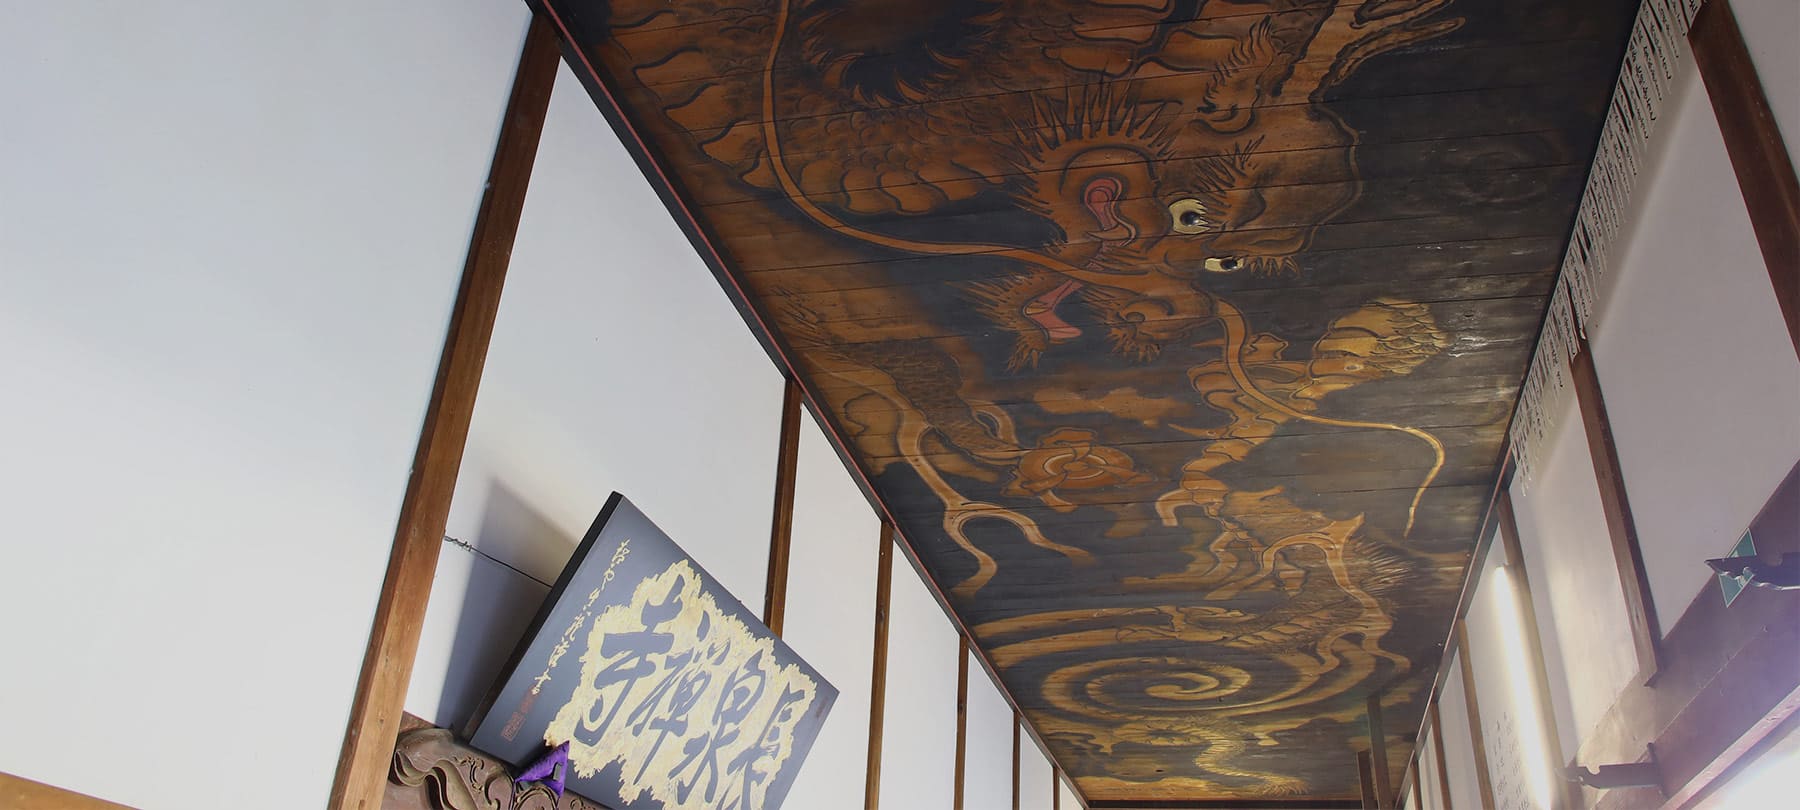 Dragon's large ceiling painting